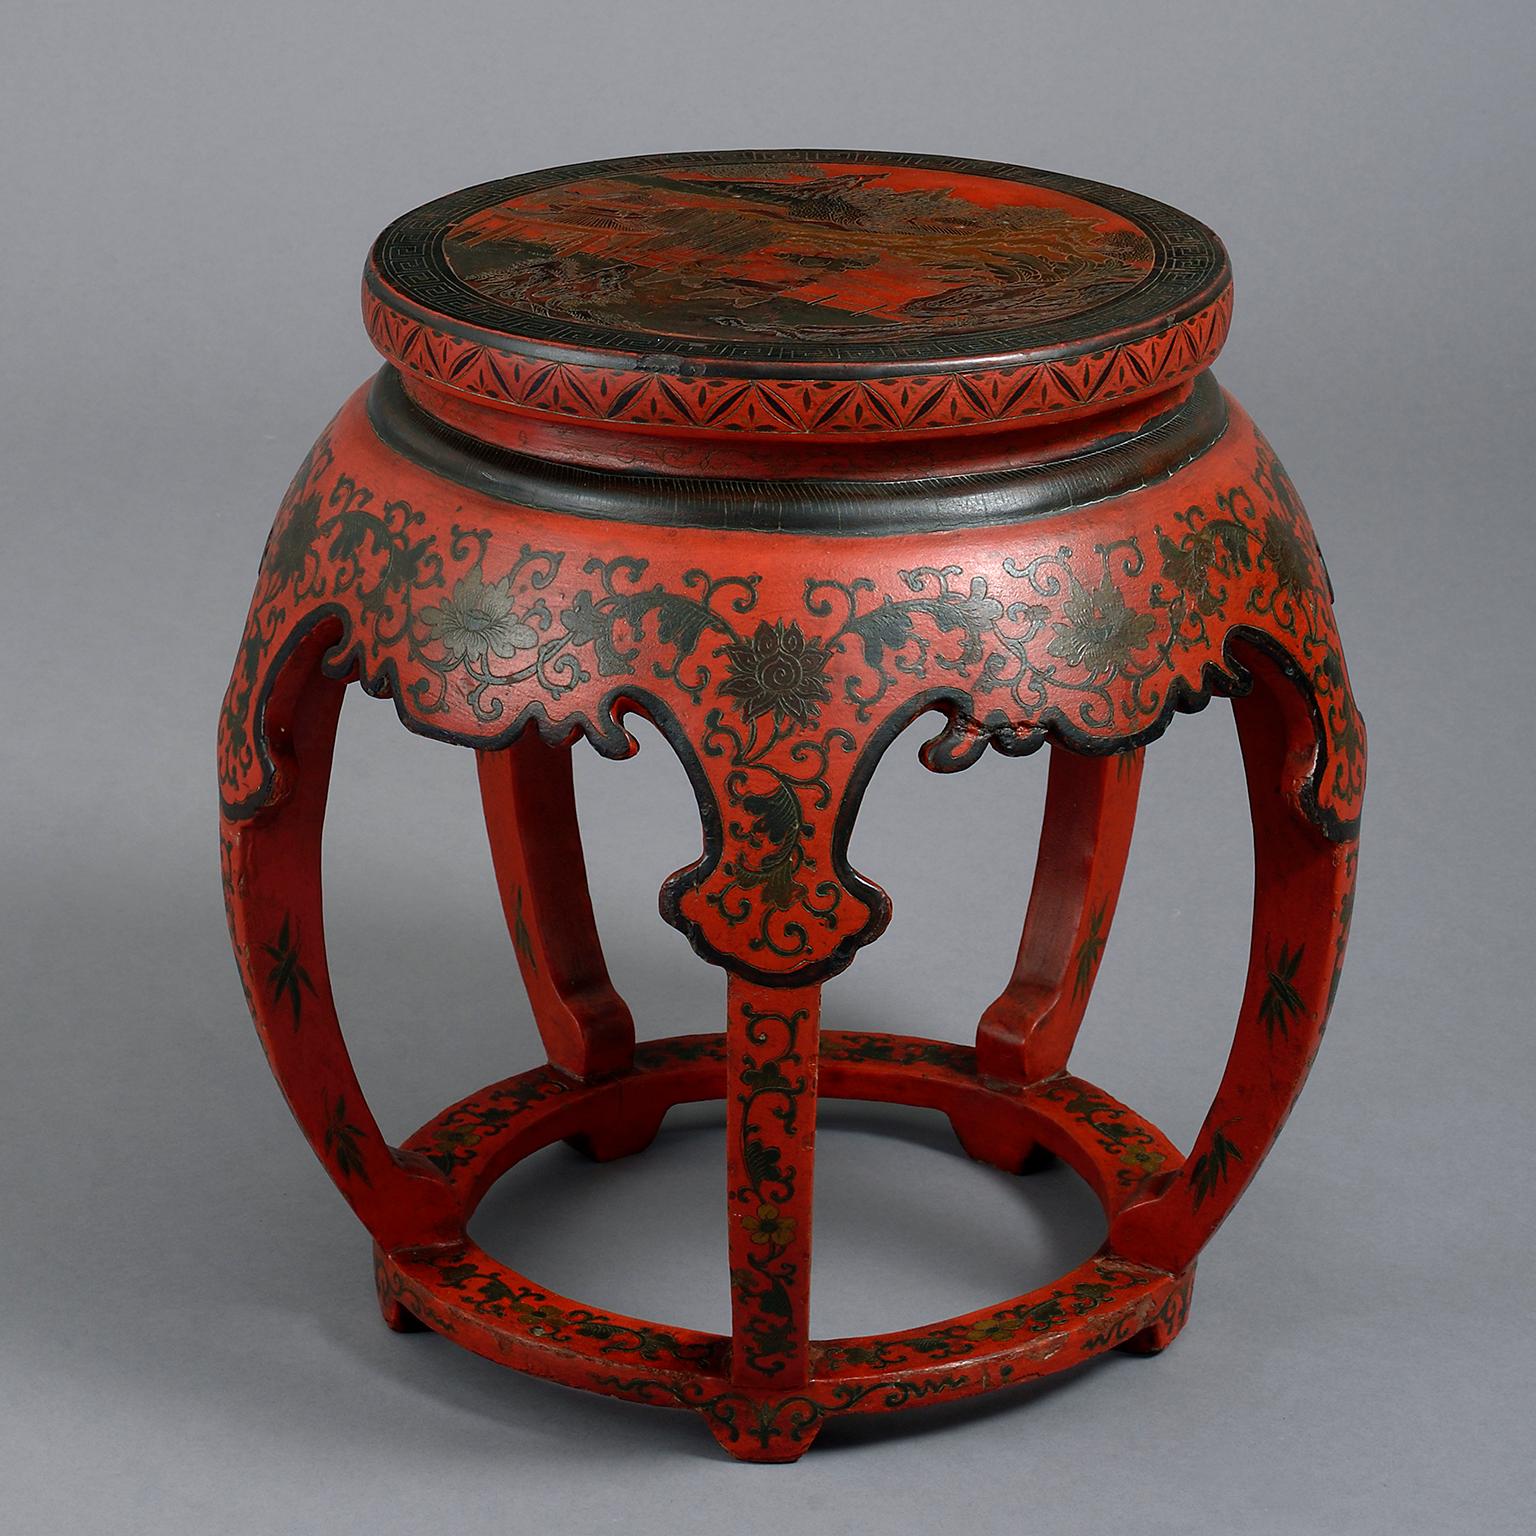 An early 20th century Chinese lacquer low table or stool with circular top and curved supports, decorated on a sealing-wax red ground.

  